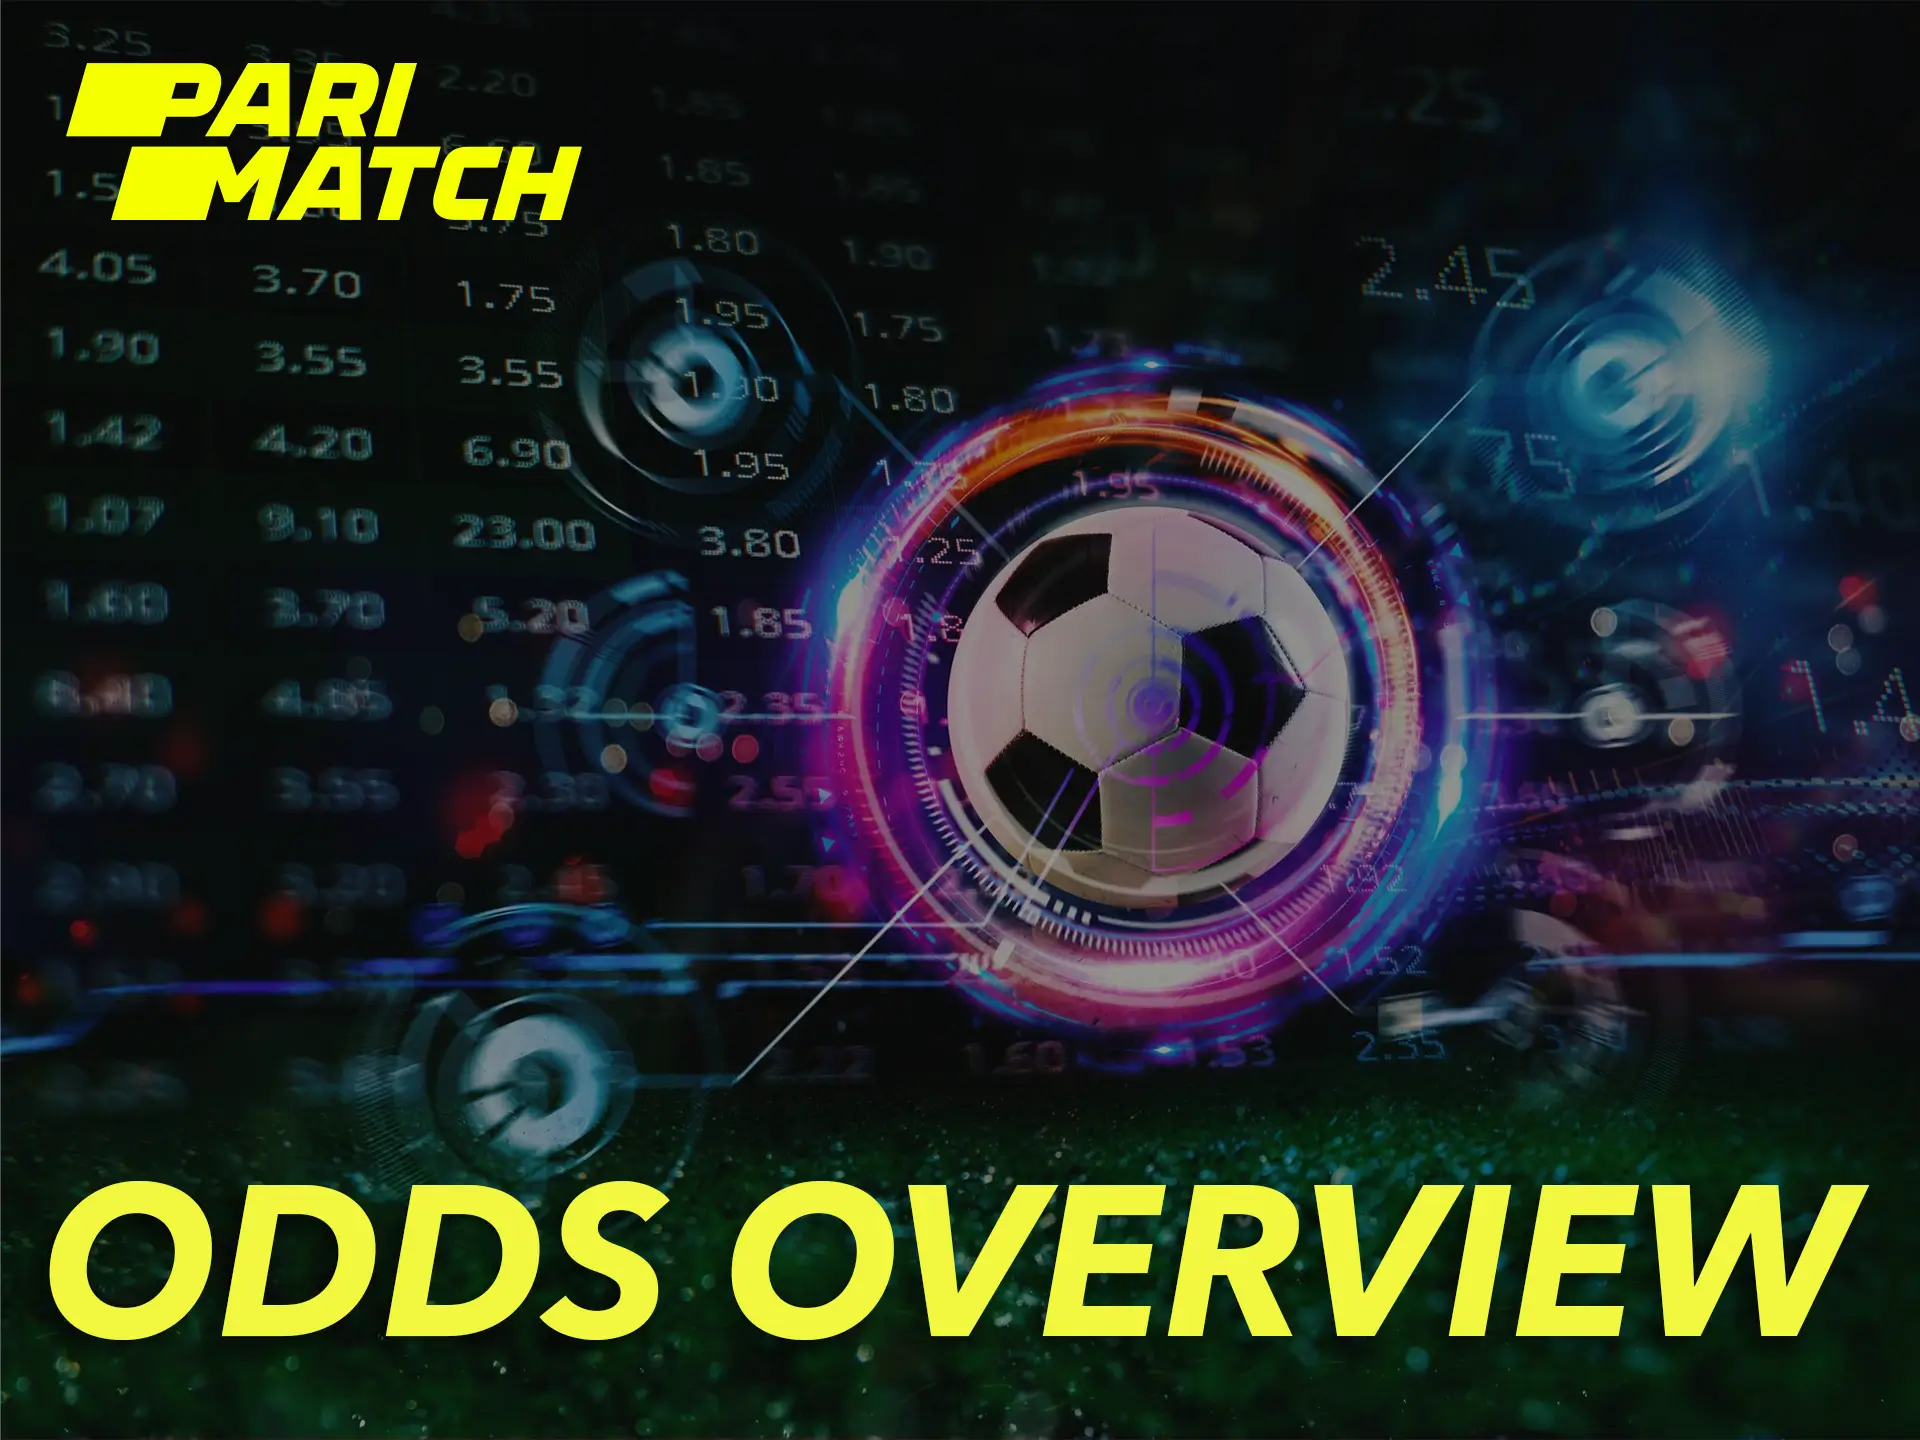 The main advantage of Parimatch is high odds.